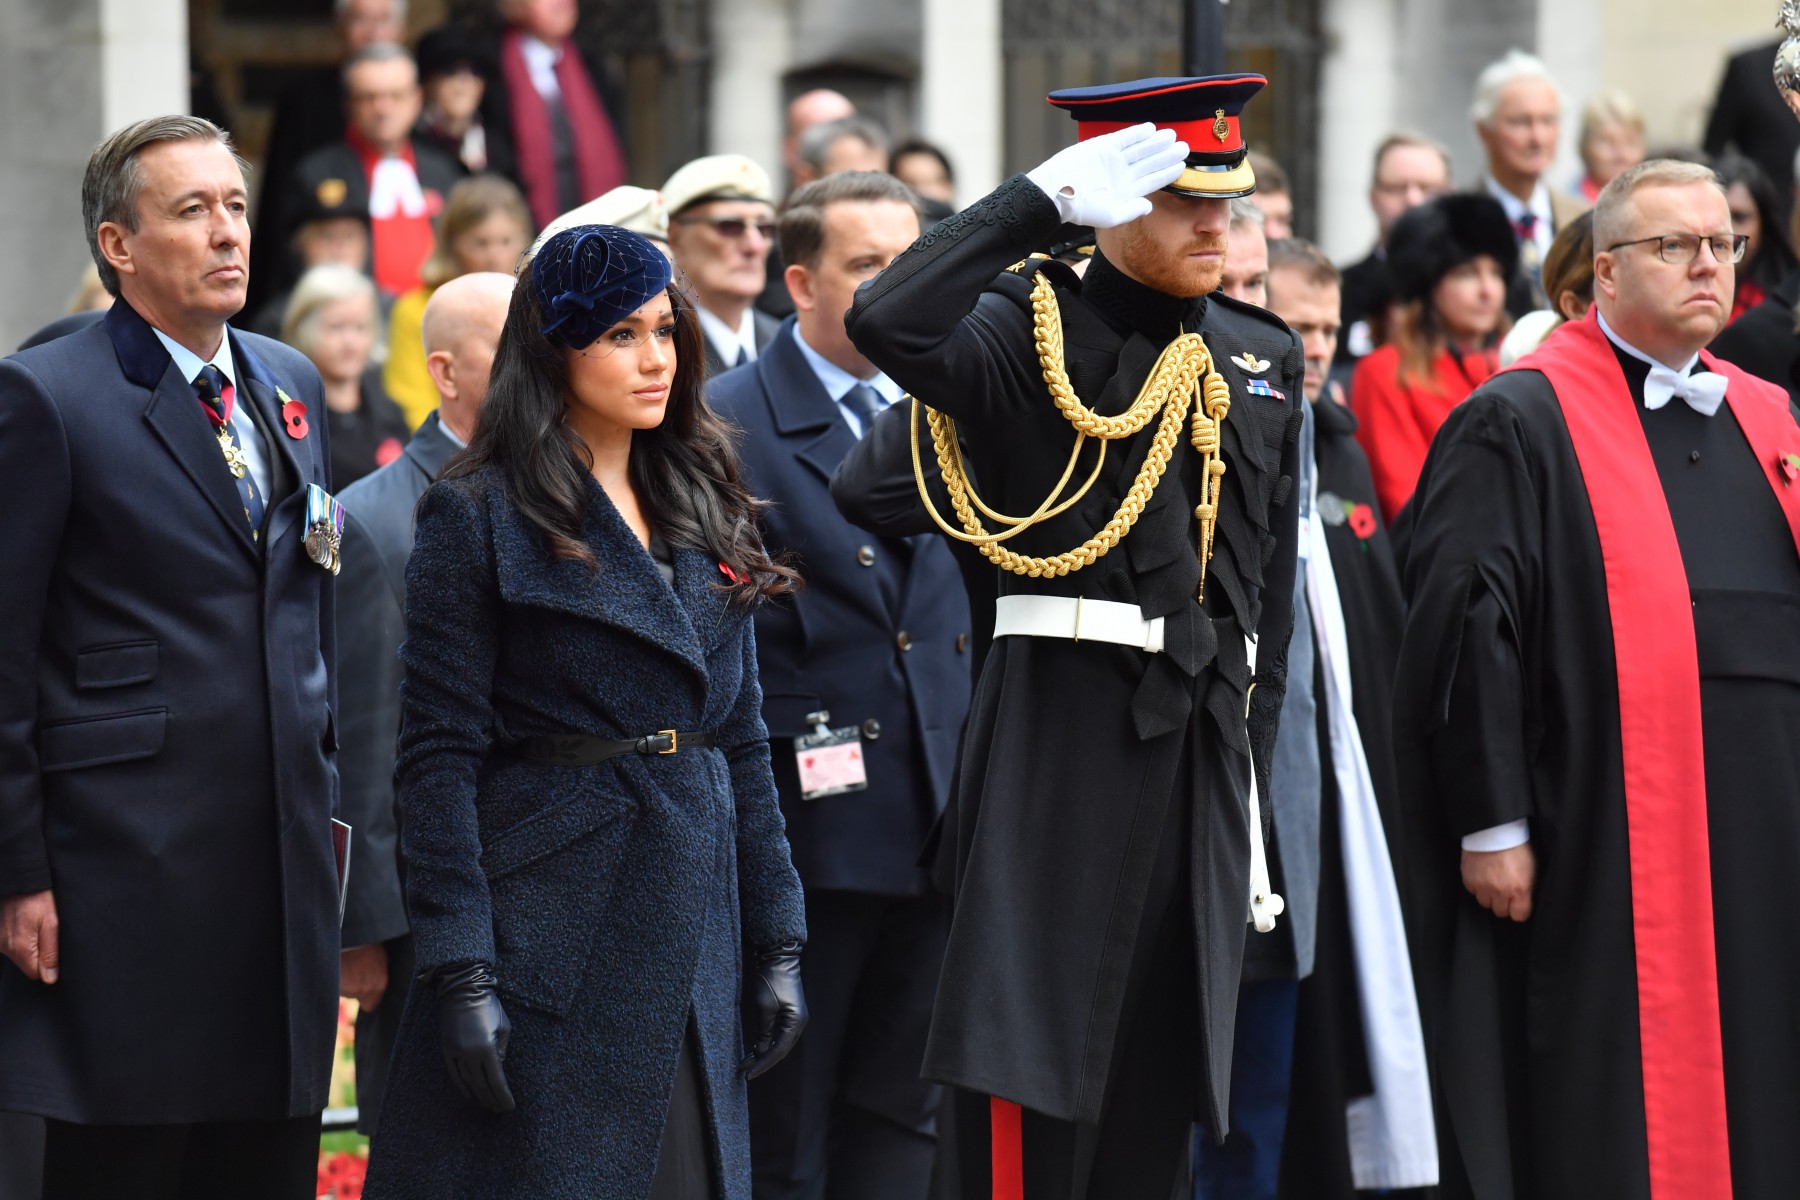 Prince Harry salutes as Meghan stands by his side